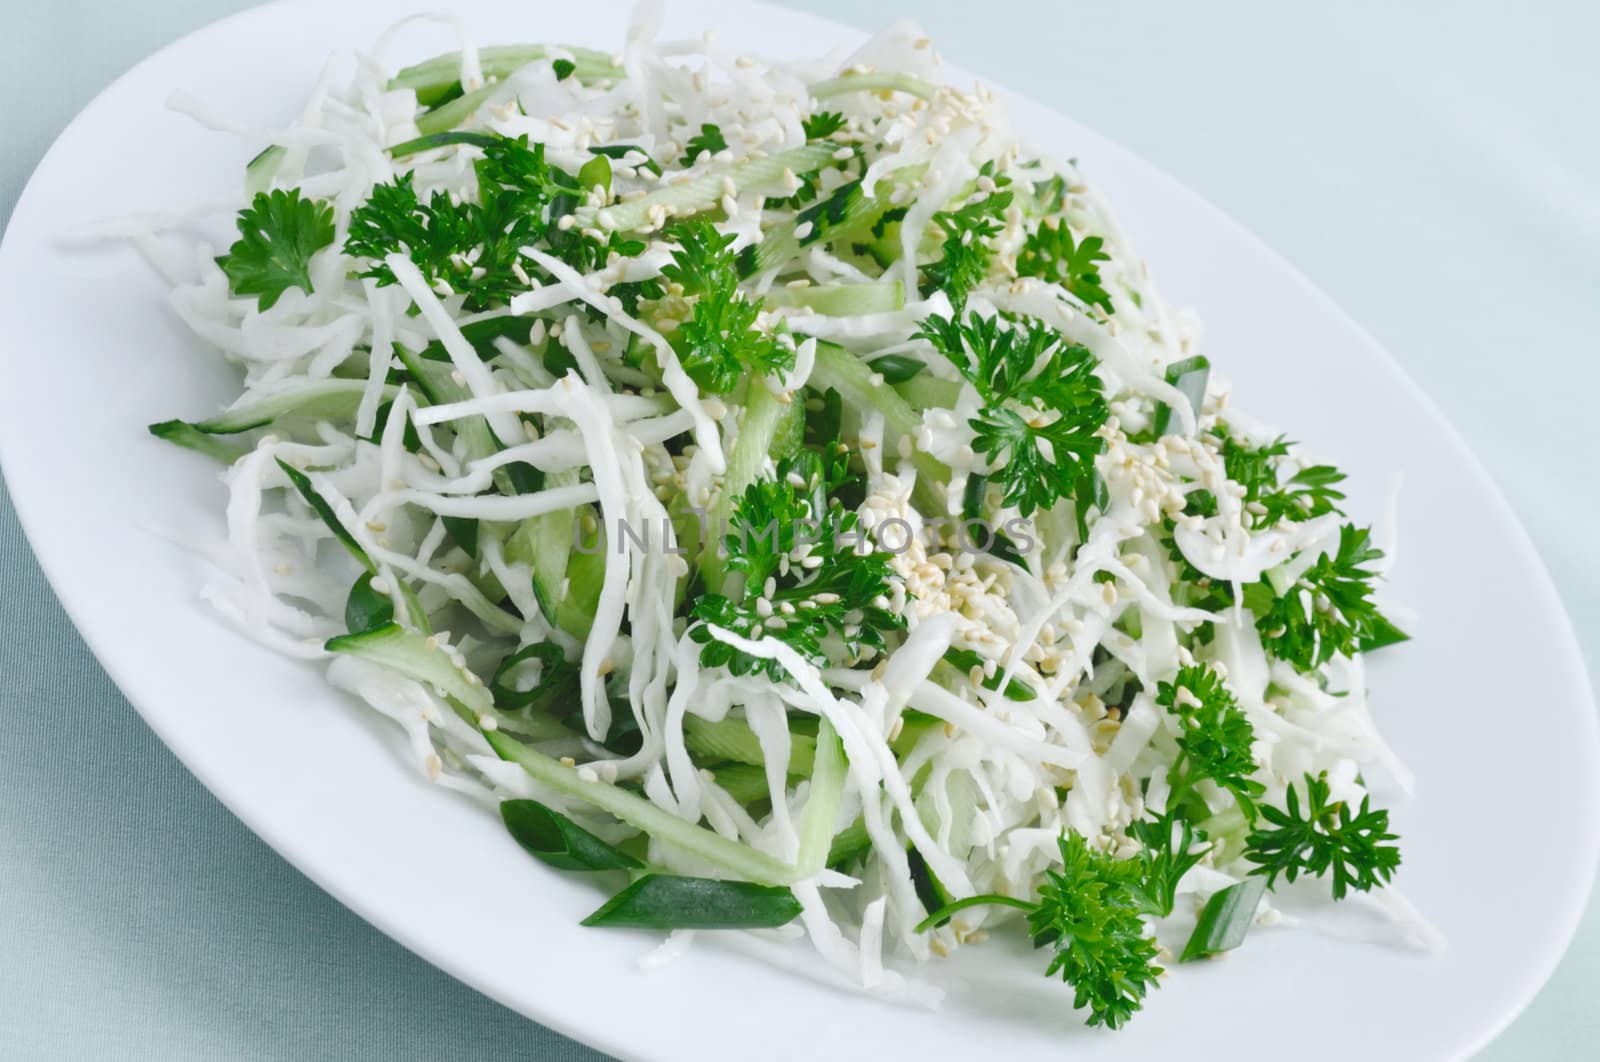 Salad of fresh cabbage and cucumber with herbs and sesame by Apolonia